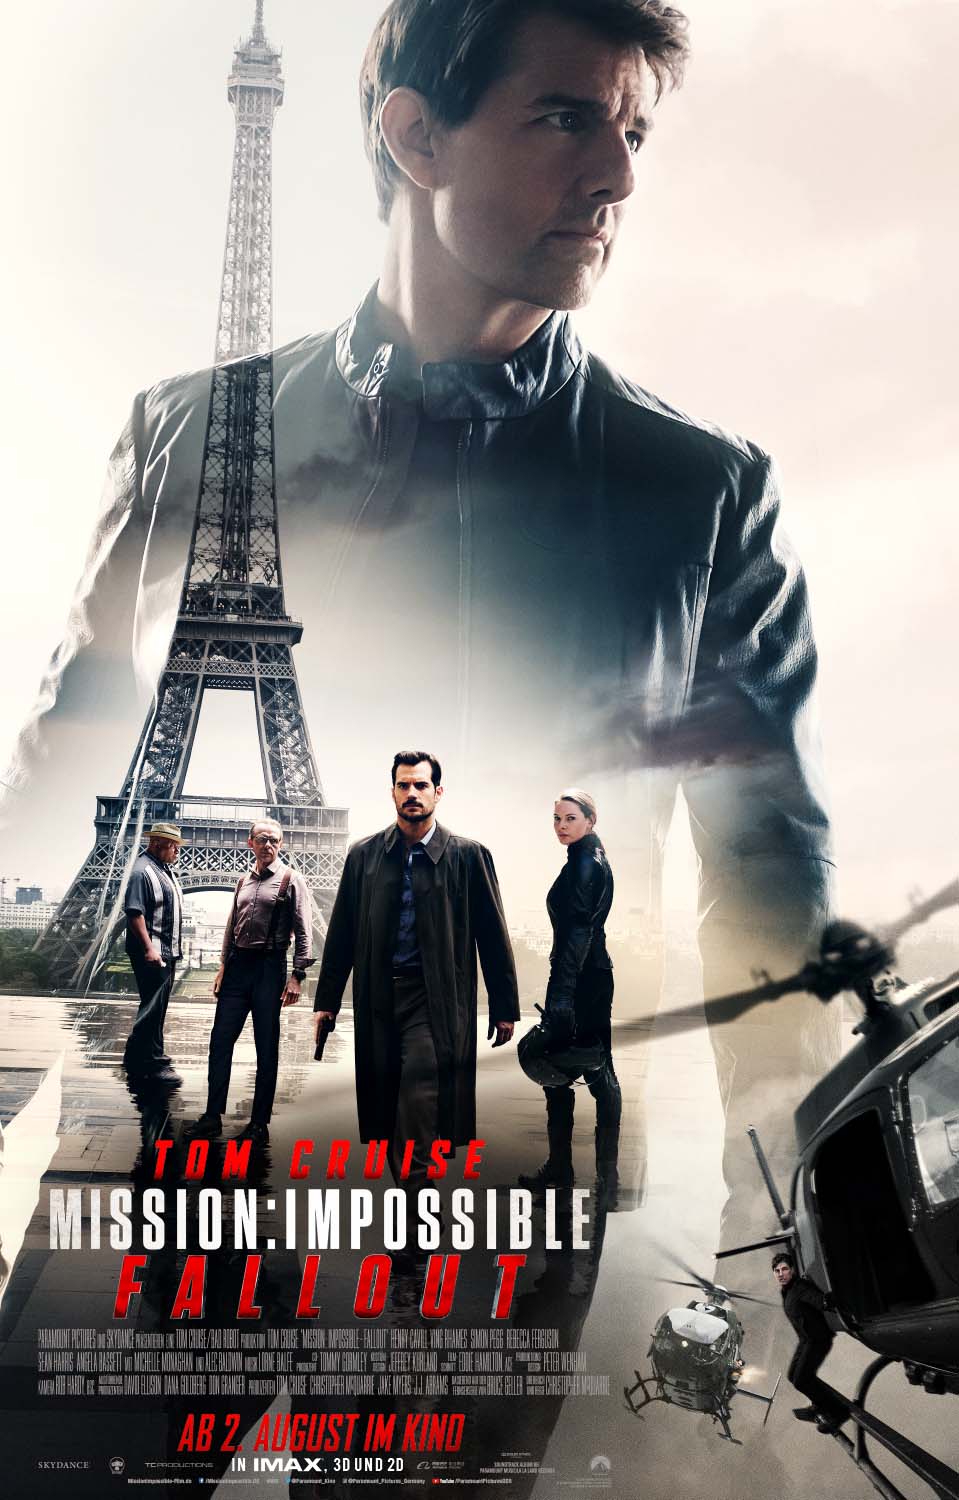 Filmplakat zu "Mission: Impossible - Fallout" © Paramount Pictures